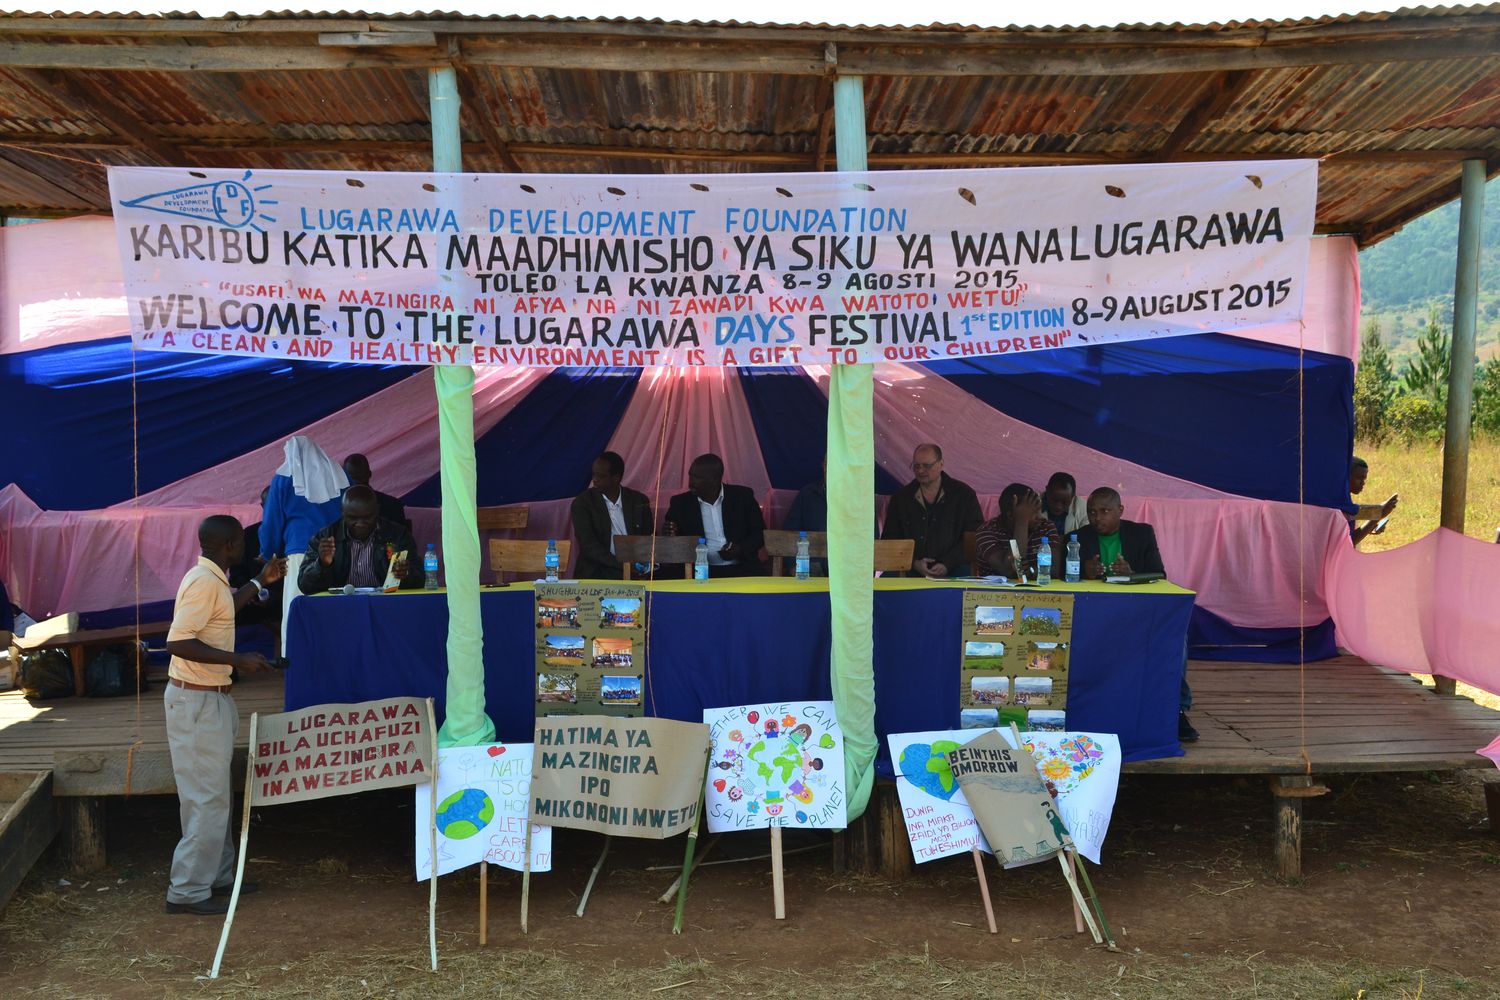 The official banner for the Lugarawa Days Festival